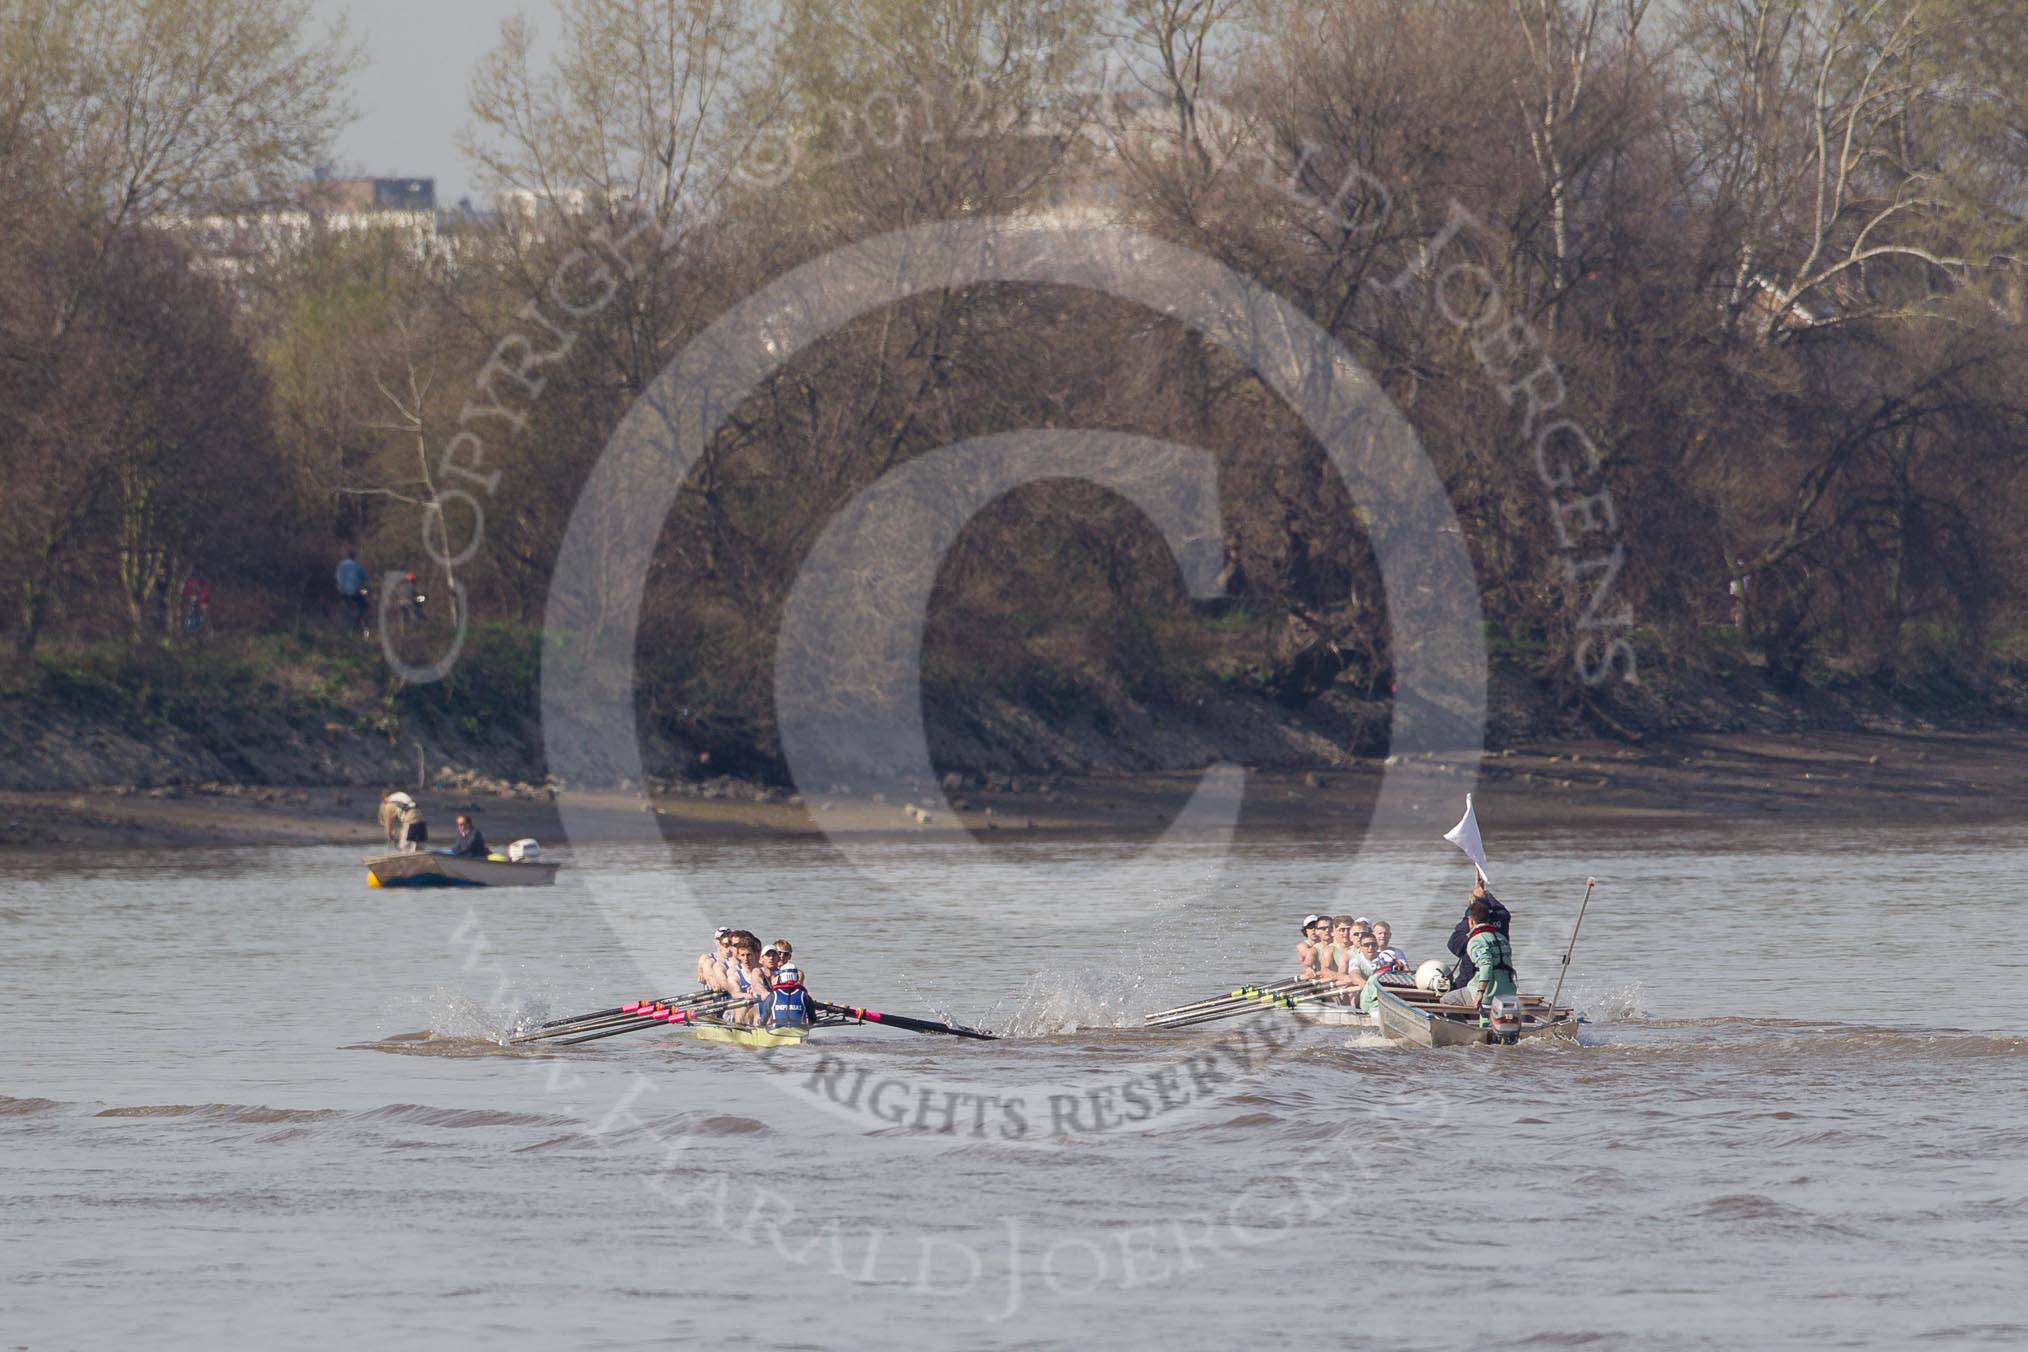 The Boat Race season 2012 - fixture CUBC vs Molesey BC: CUBC Goldie v Imperial fixture: The Imperial boat on the left, behind umpire Simon Harris..




on 25 March 2012 at 14:48, image #65